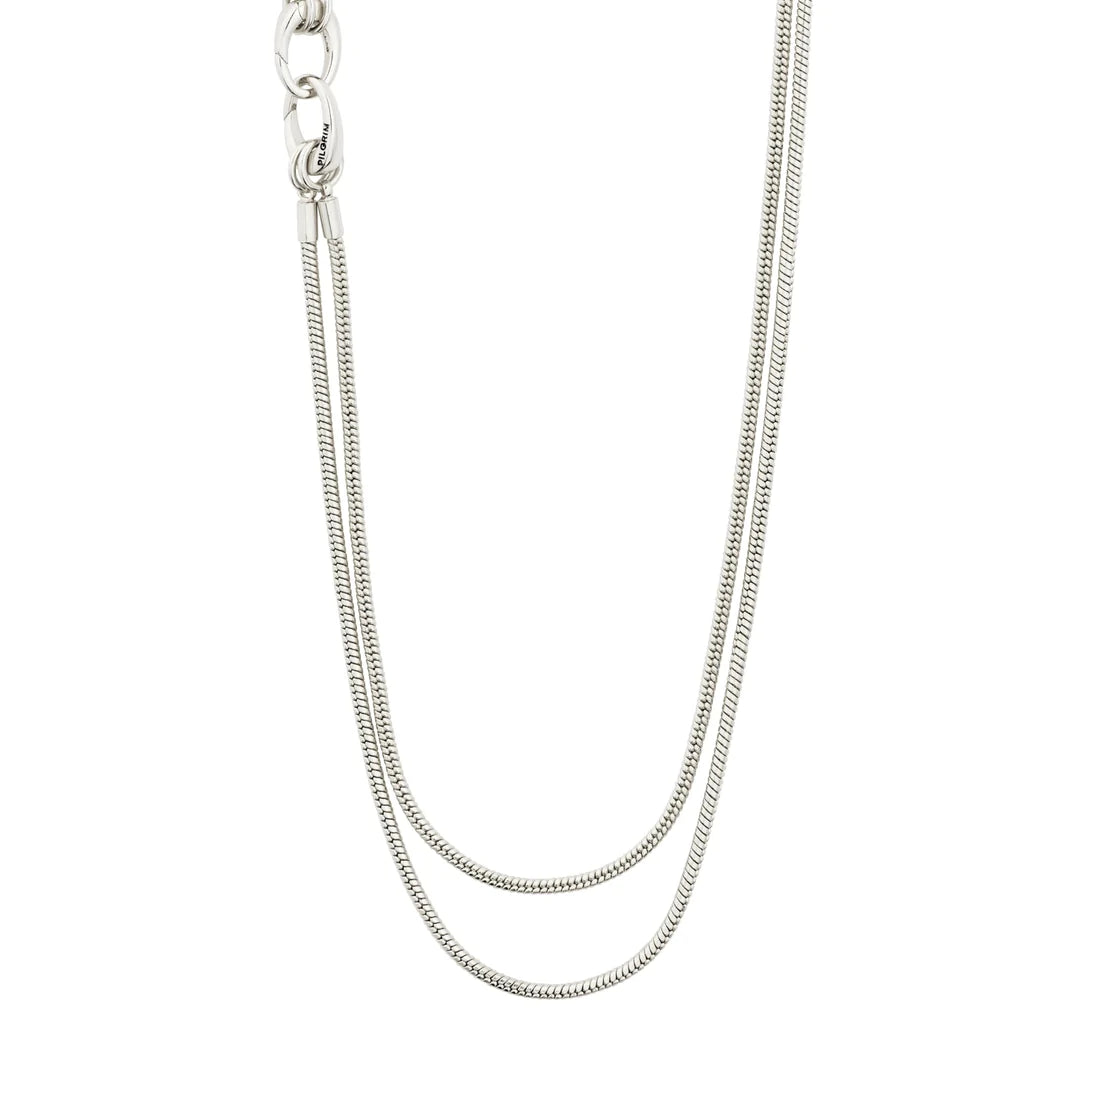 SilverSnake Chain Necklace